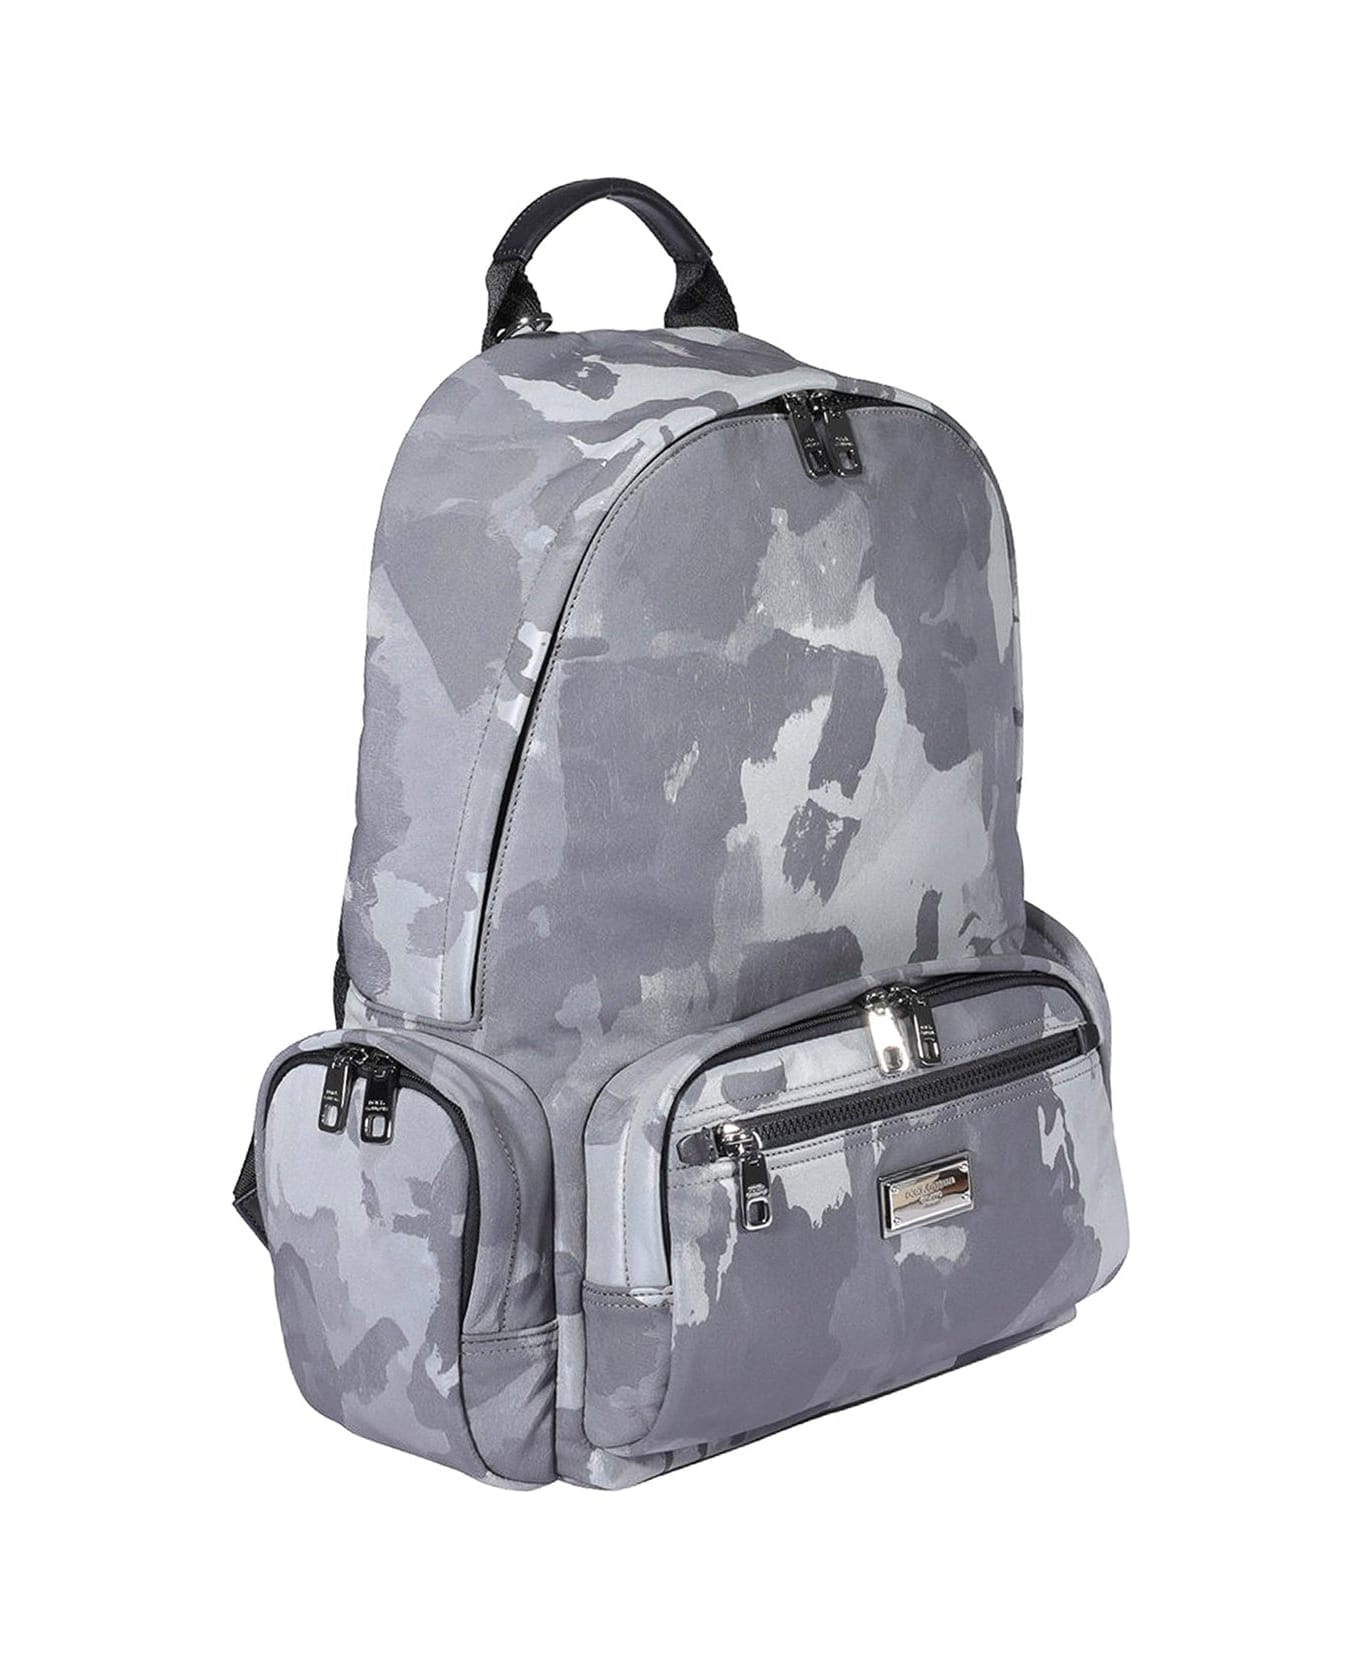 Dolce & Gabbana Camouflage Backpack - Gray バックパック